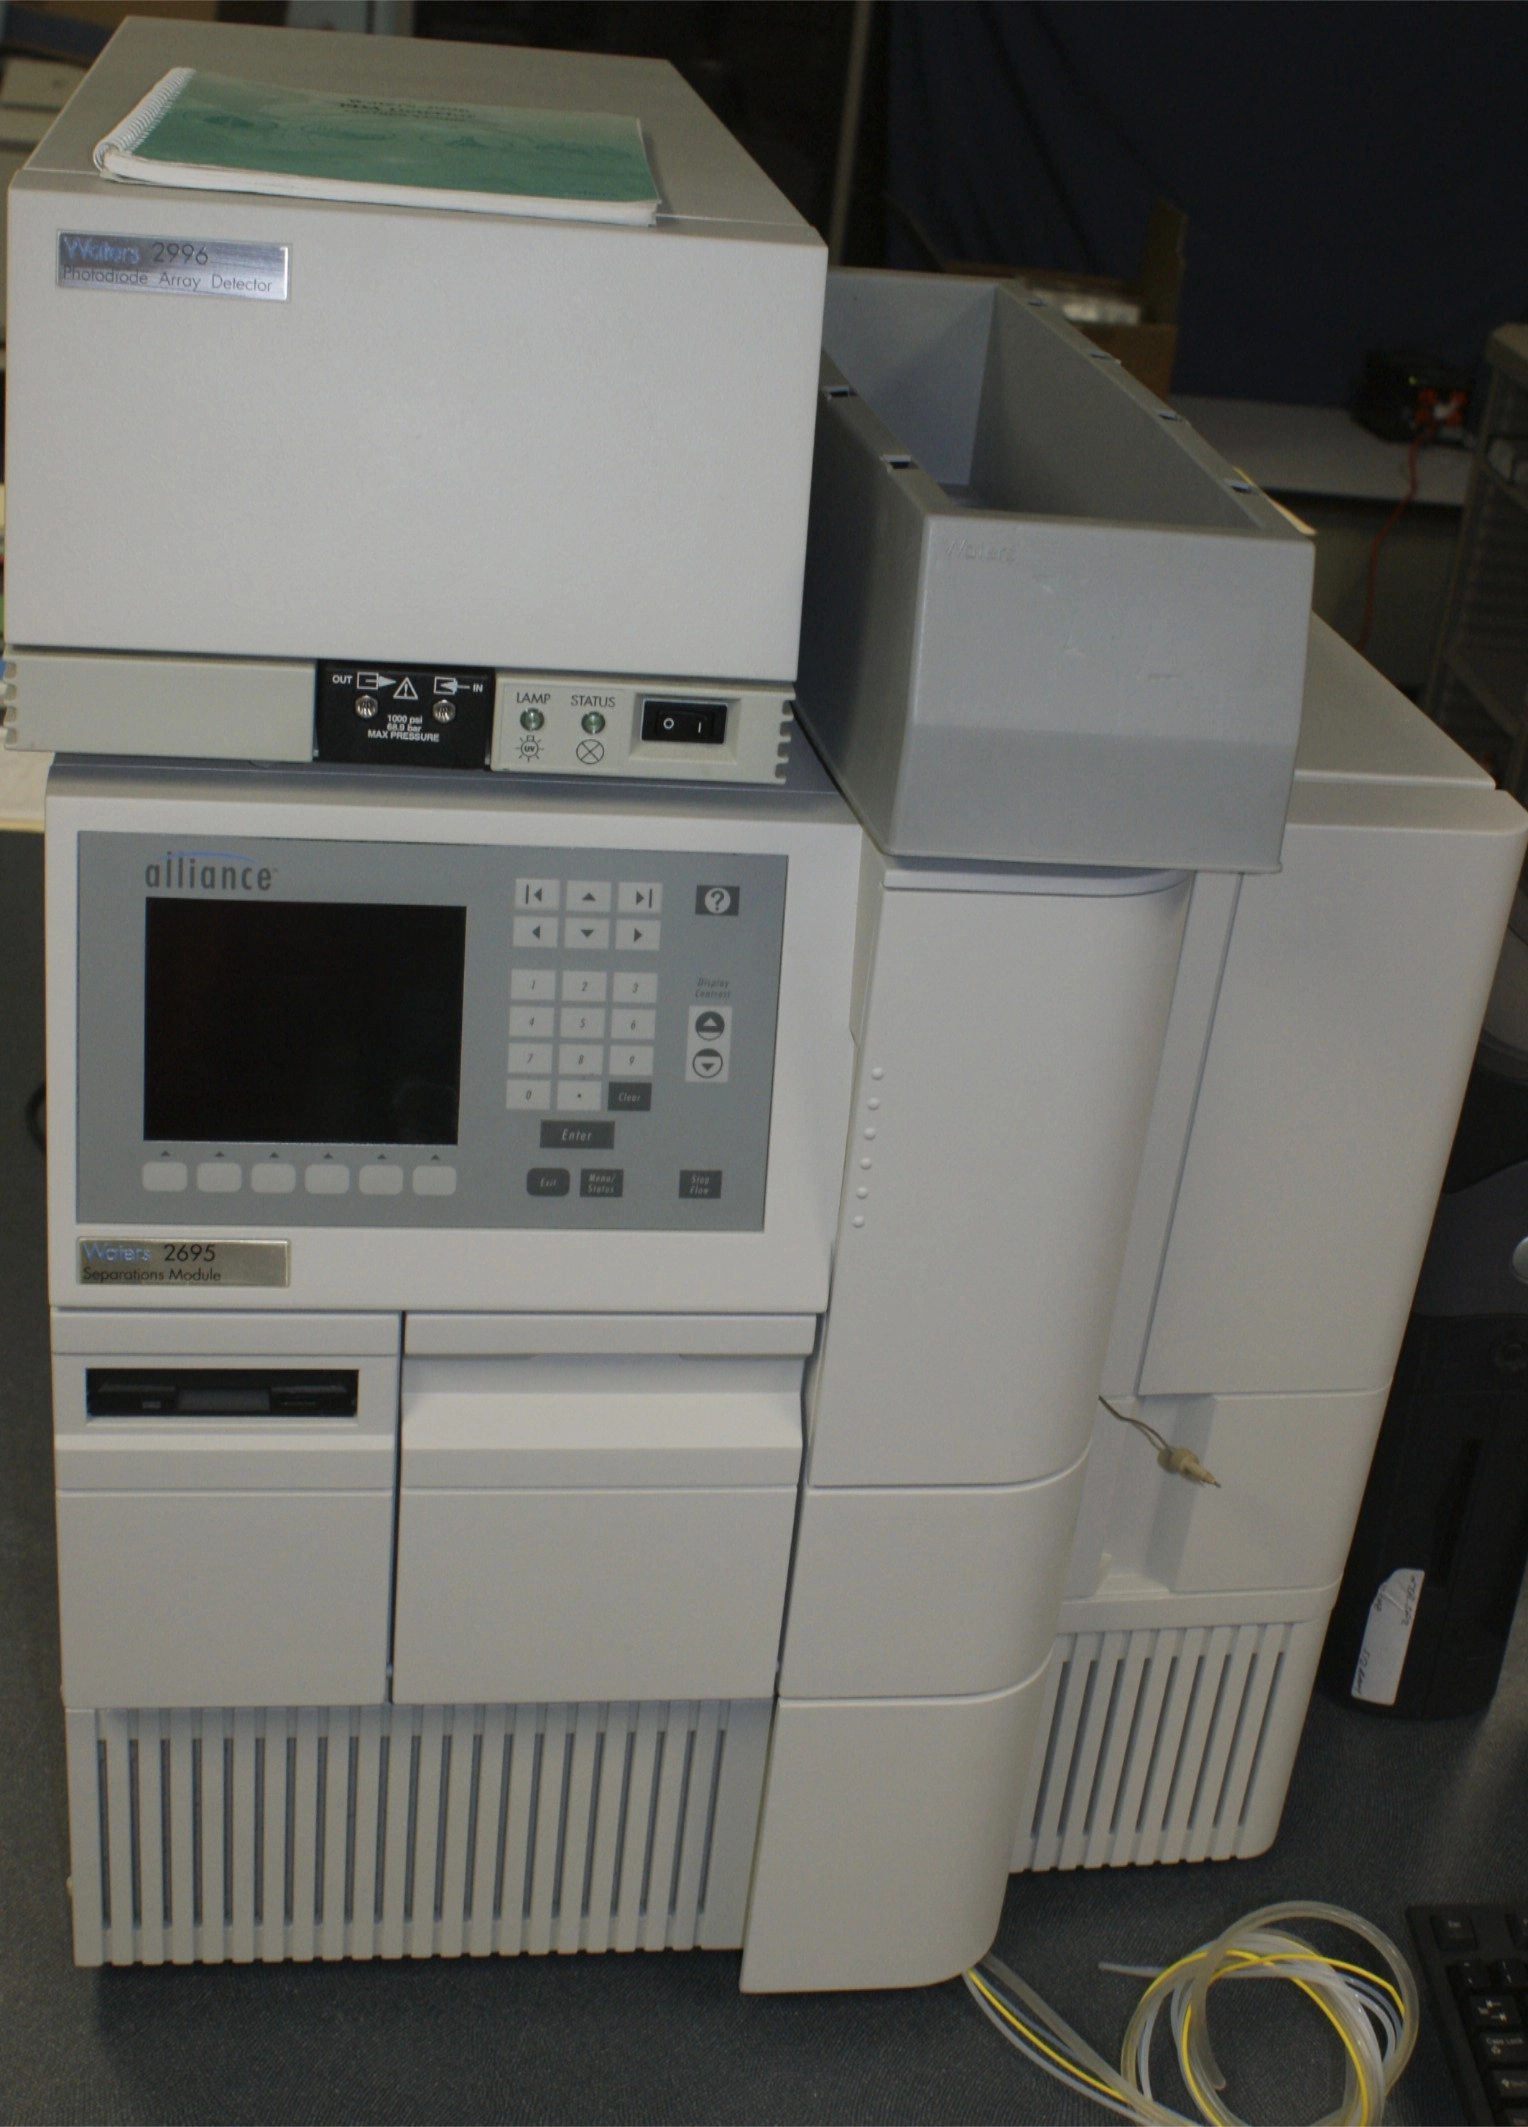 Waters 2695 HPLC with Waters 996 Diode Array